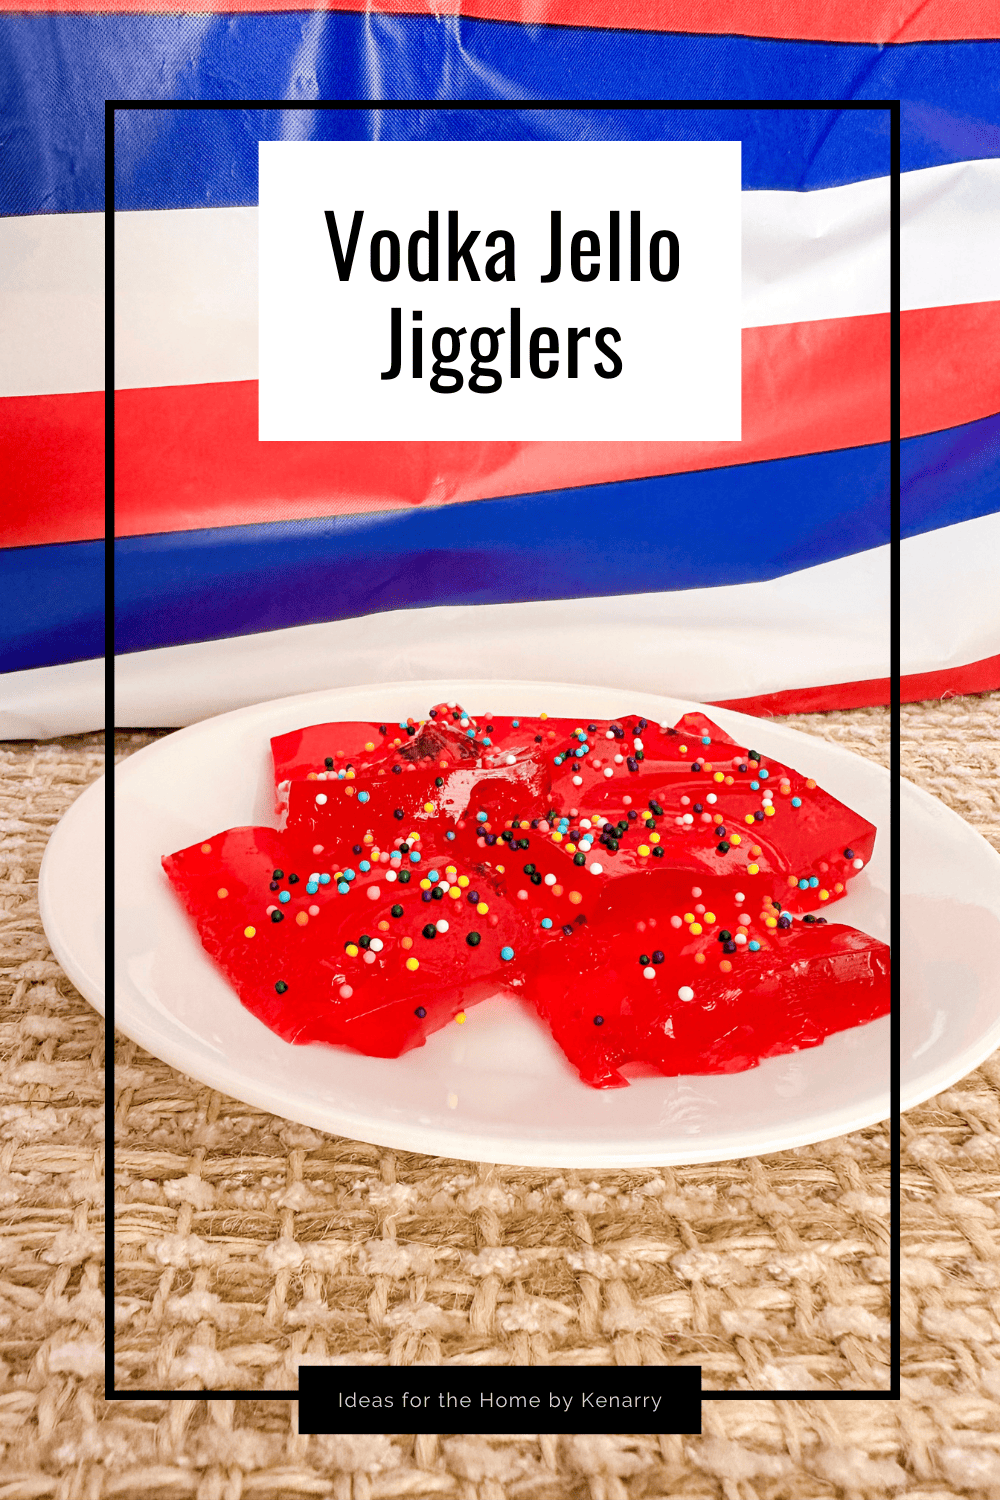 Vodka Jello jigglers with red gelatin and rainbow sprinkles.